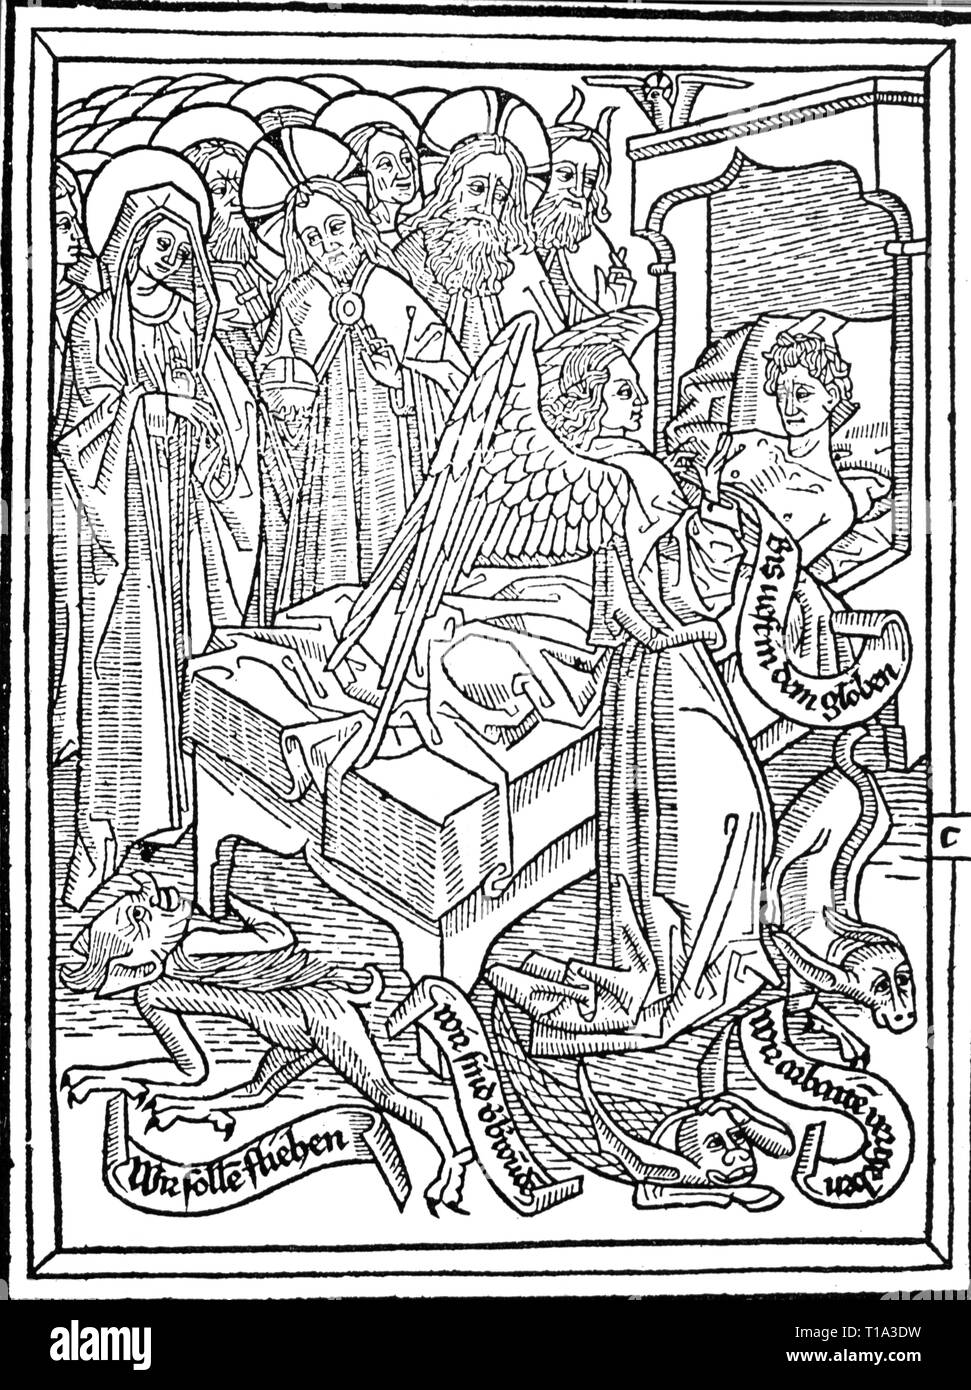 religion, Christianity, allegory, dying person is protected by God and the saints while the evil powers are fleeing, woodcut, by Ludwig of Ulm, from: "Ars moriendi", Ulm, 1470, Additional-Rights-Clearance-Info-Not-Available Stock Photo